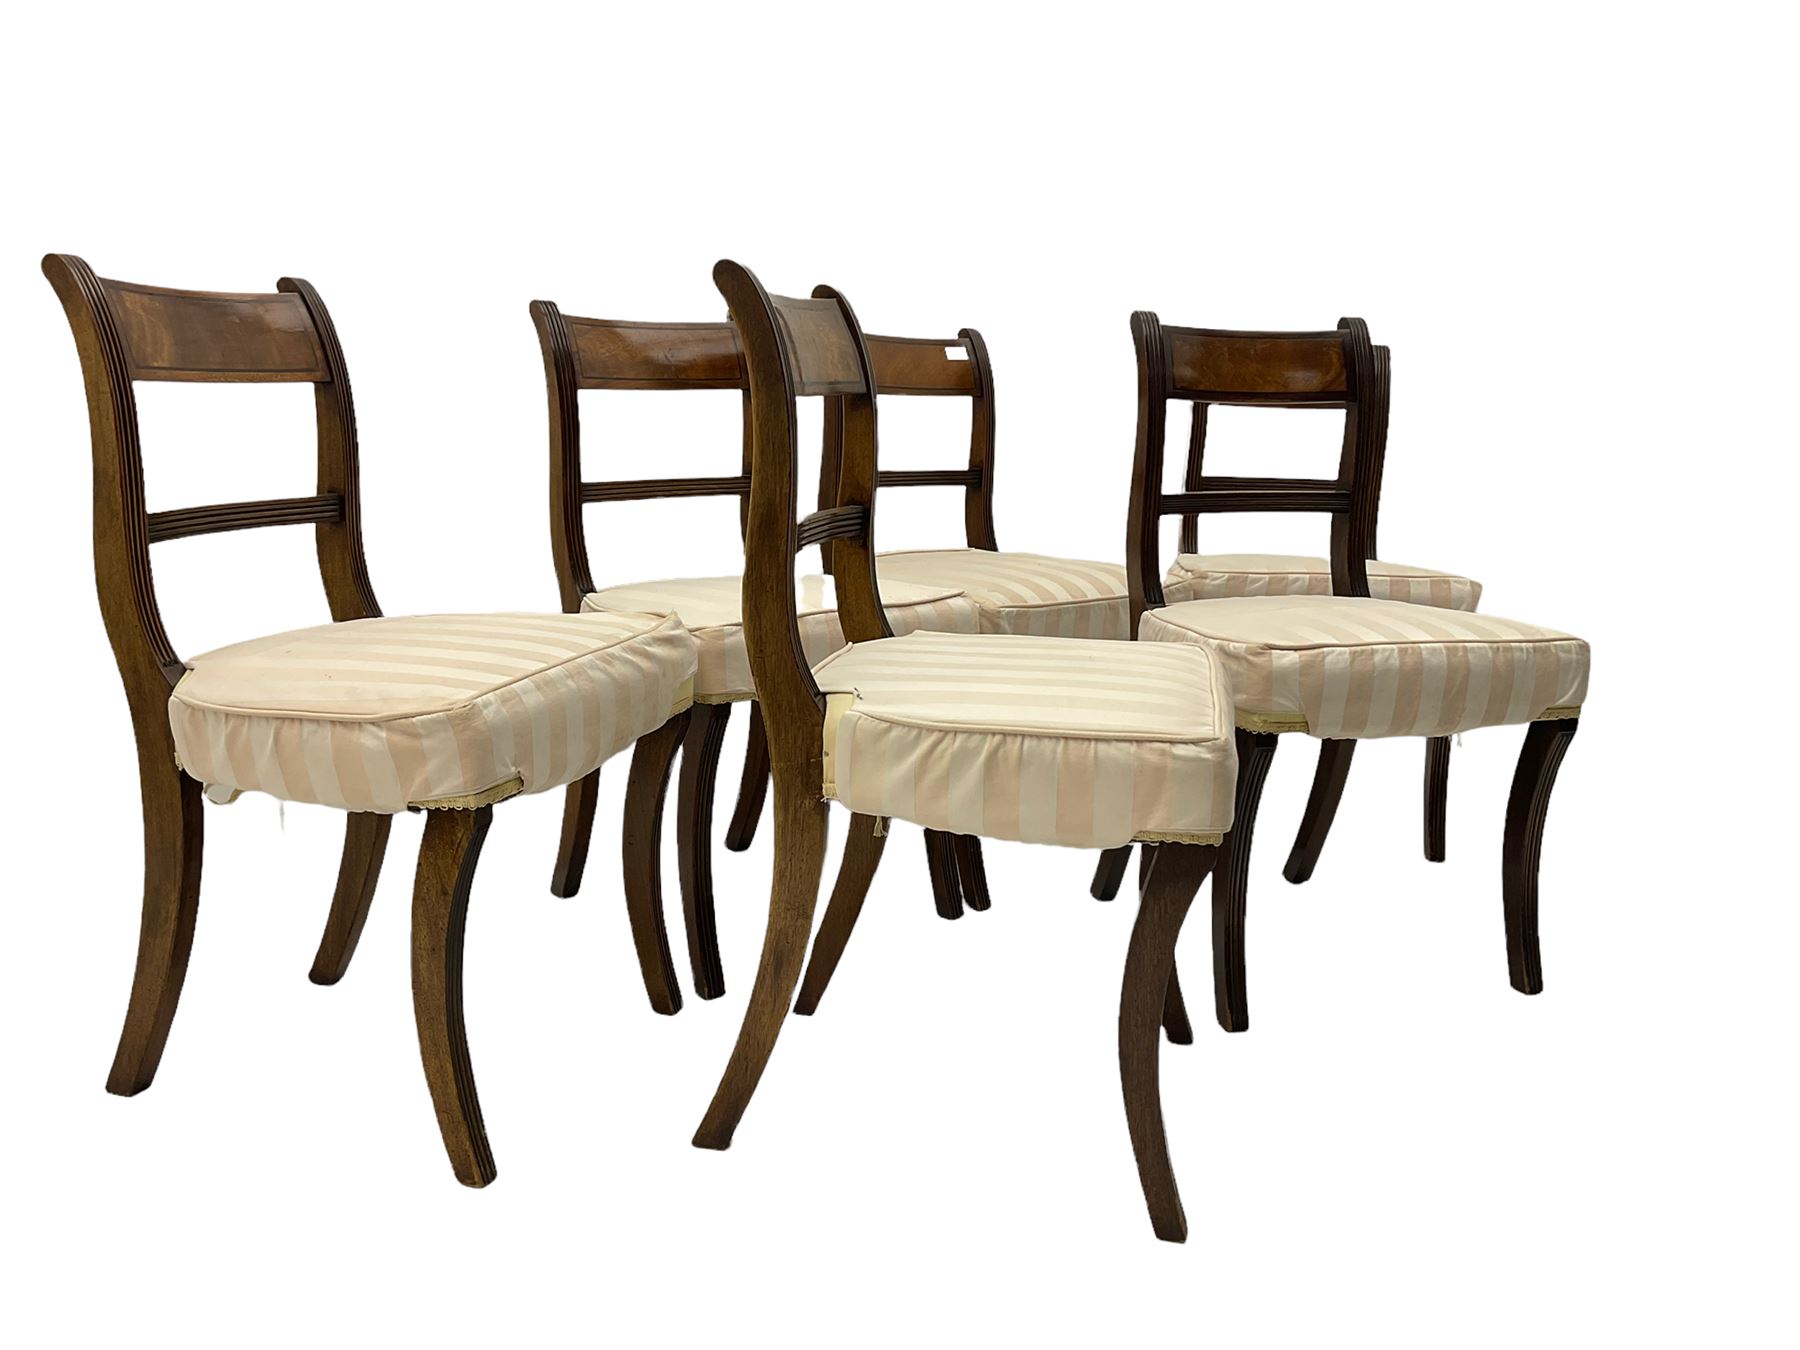 Regency period set six mahogany dining chairs - Image 3 of 5